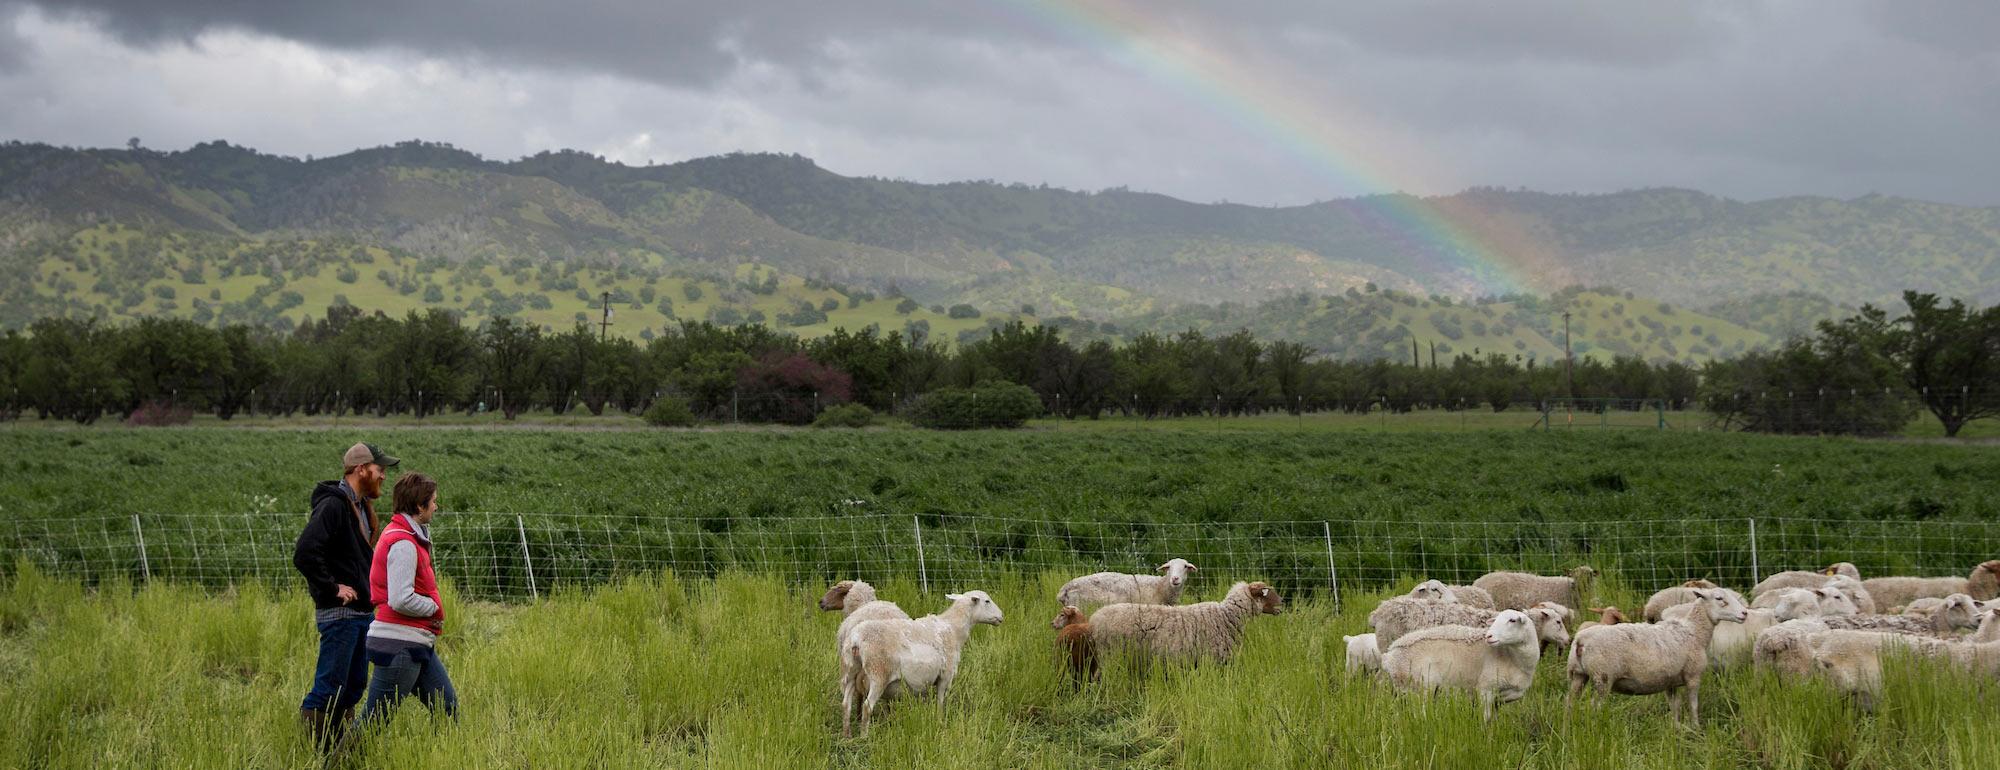 A female and male rancher walk with their sheep across a green landscape with a rainbow in the background